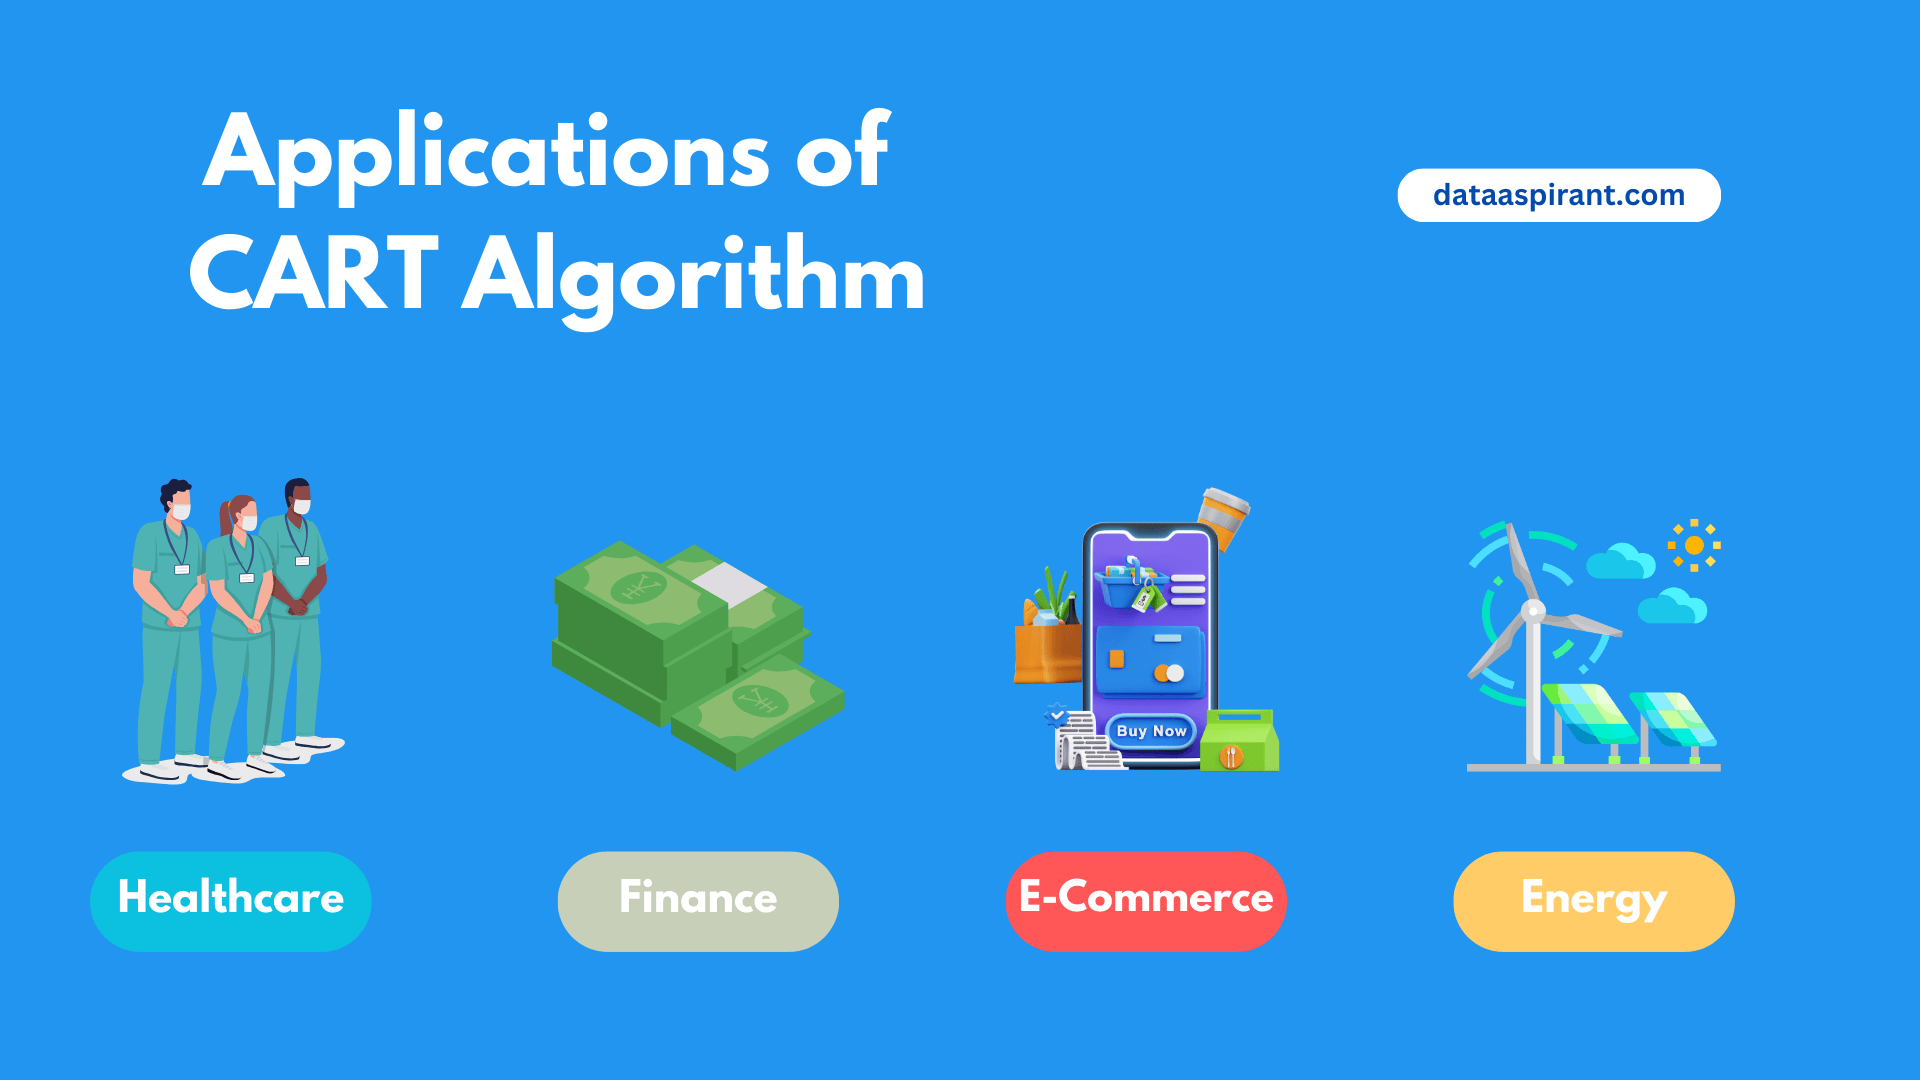 Applications and Use Cases of the CART Algorithm